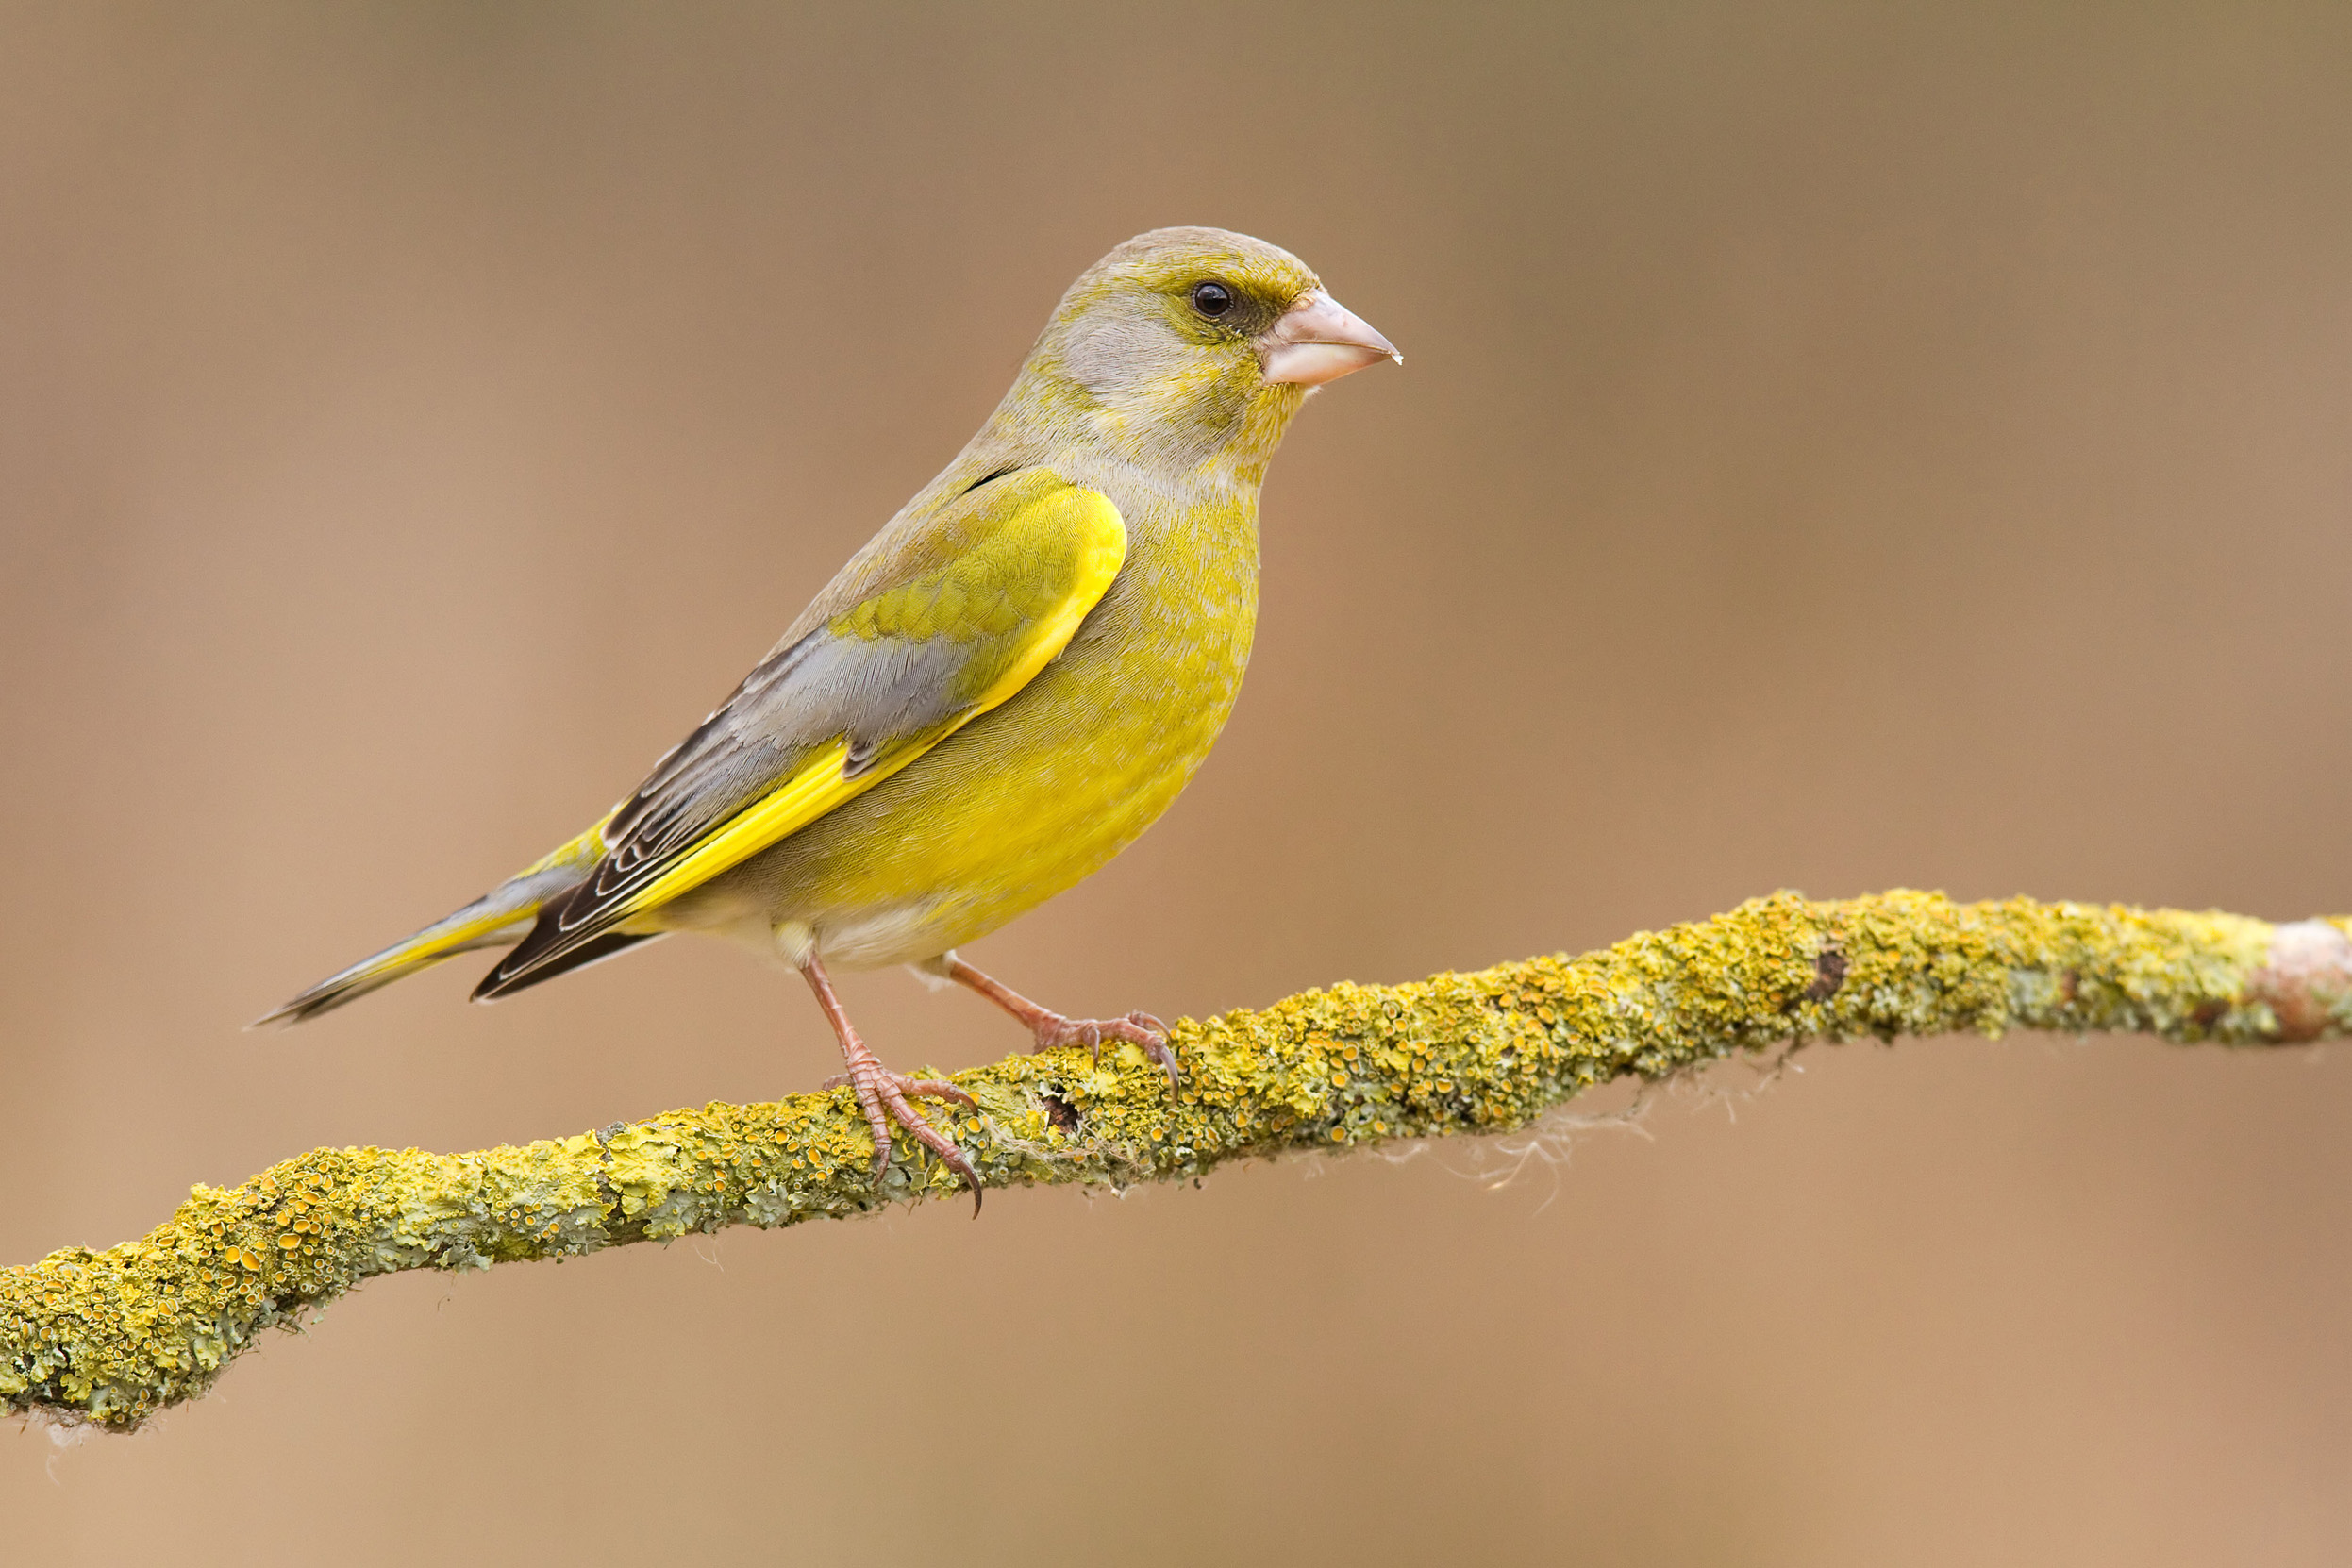 An adult male Greenfinch perched on a tree branch covered in yellow lichen.